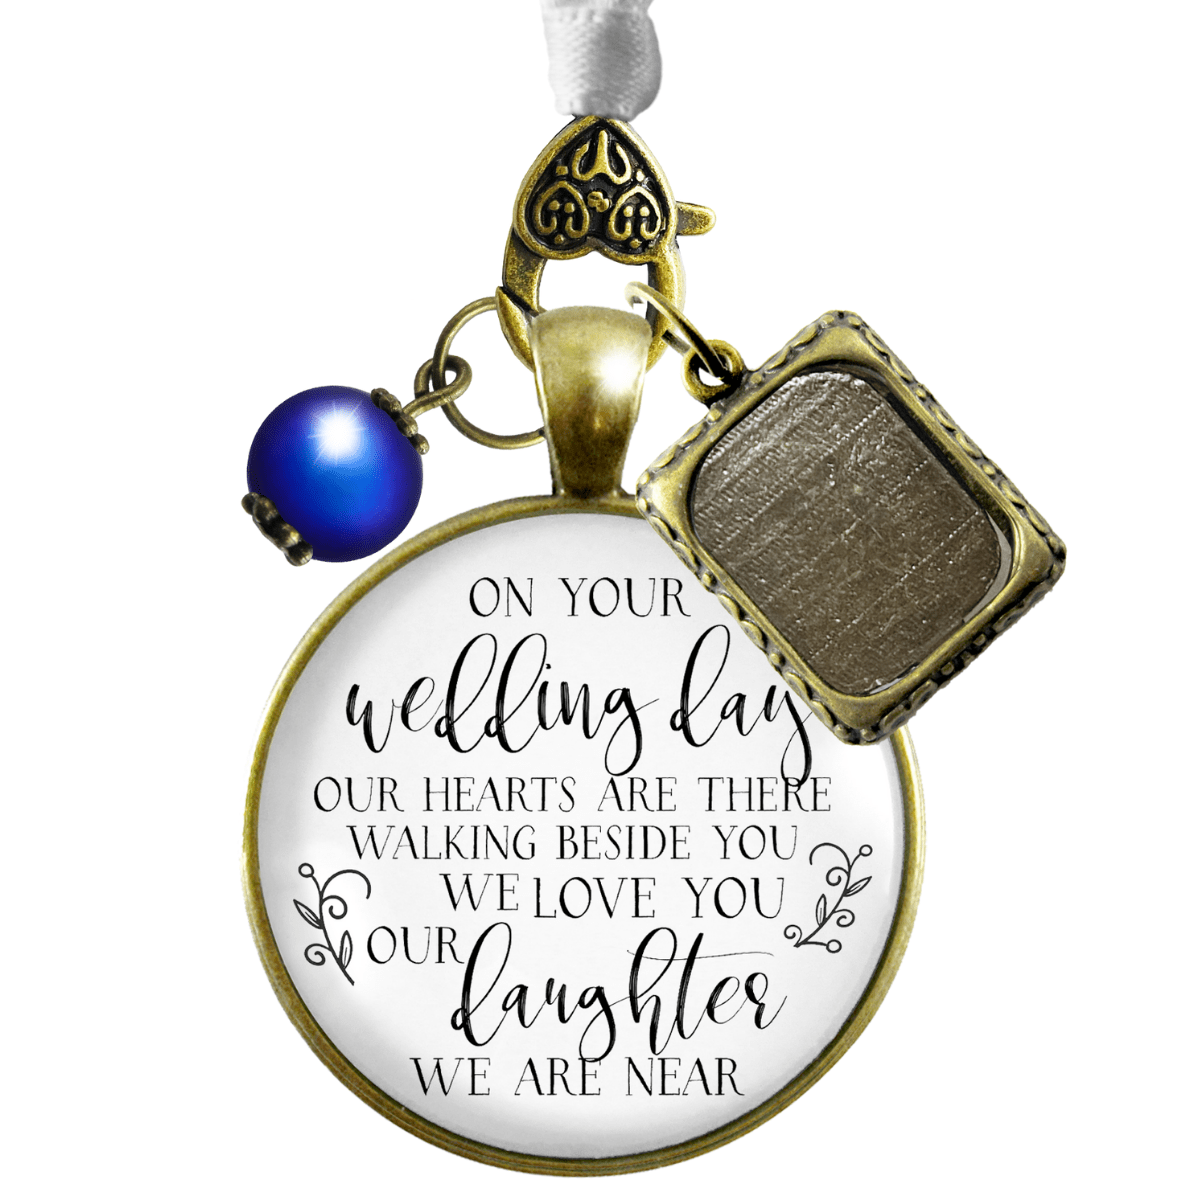 On Your Wedding Day OUR Heart Is There Walking Beside You DAUGHTER - BRONZE - WHITE - BLUE BEAD